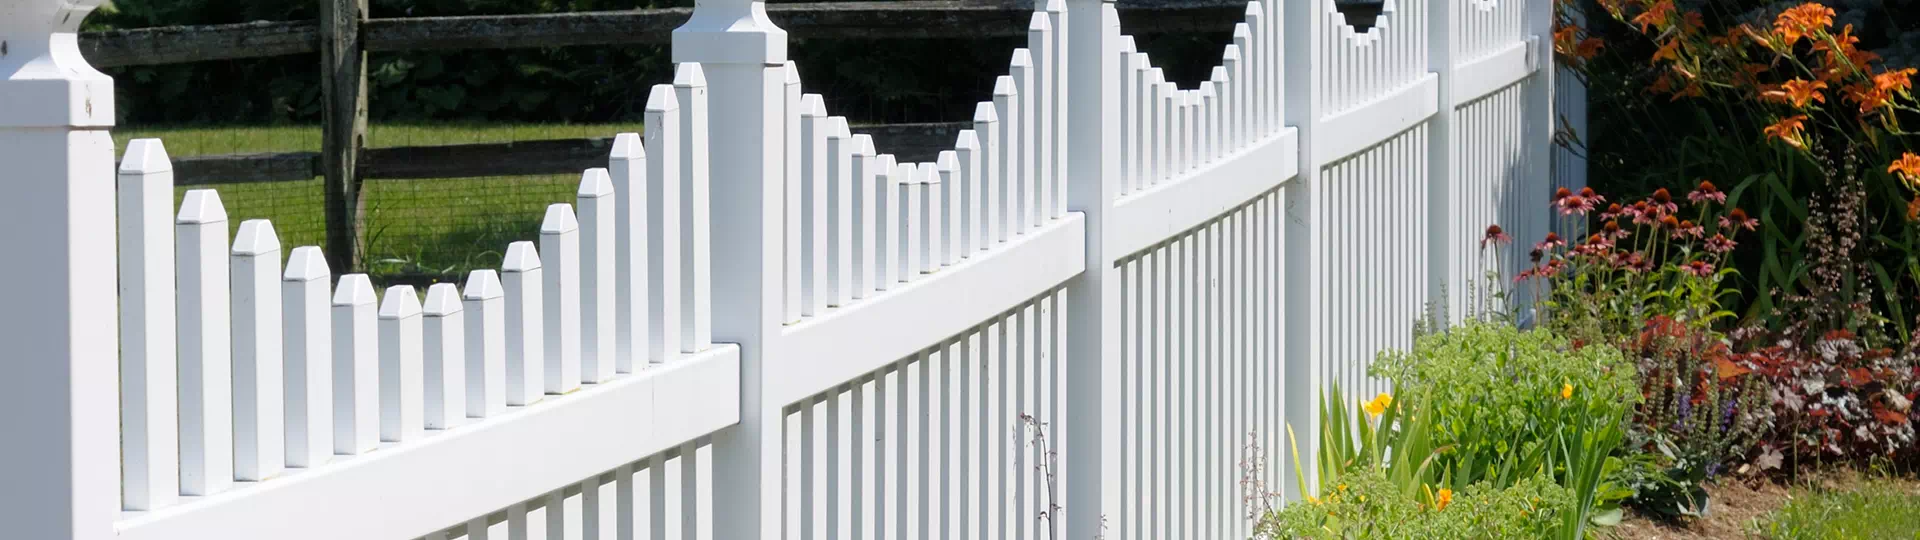 How To Clean A Vinyl Fence Simple Green